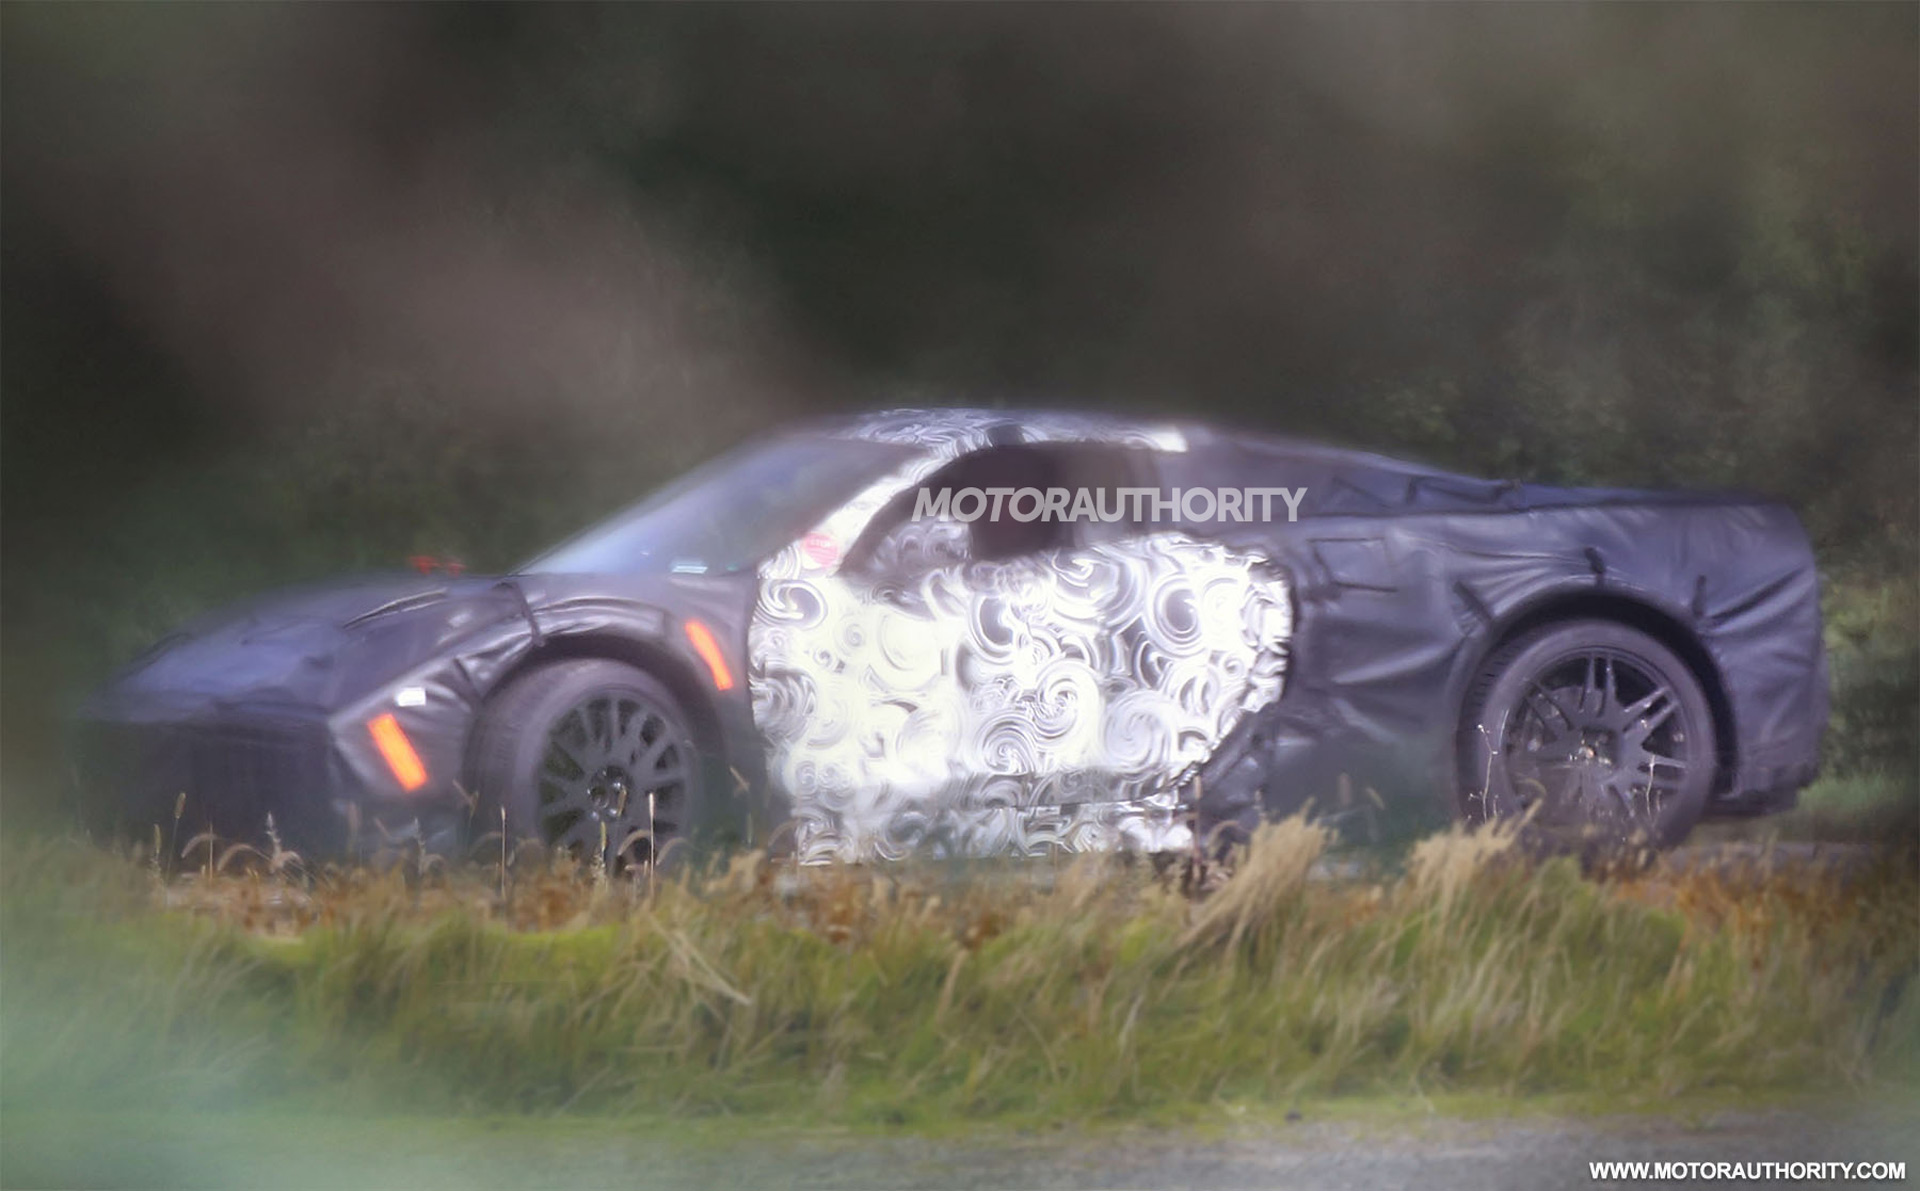 This Motor Authority spy photo of a C8 mule is heavily cammoflaged